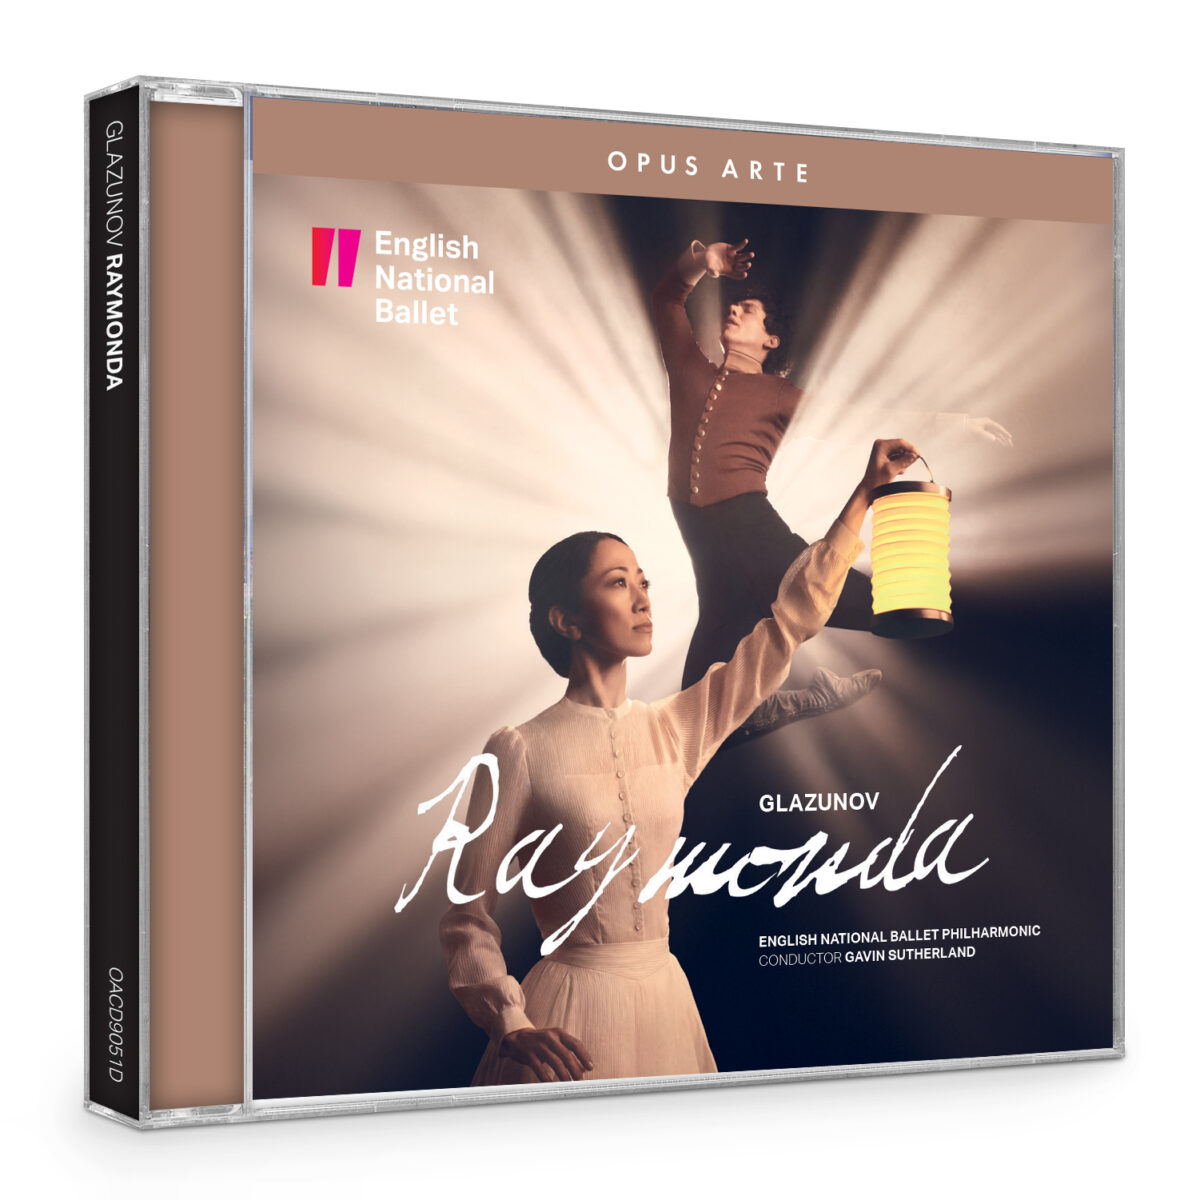 A CD case for the score of English National Ballet's Raymonda